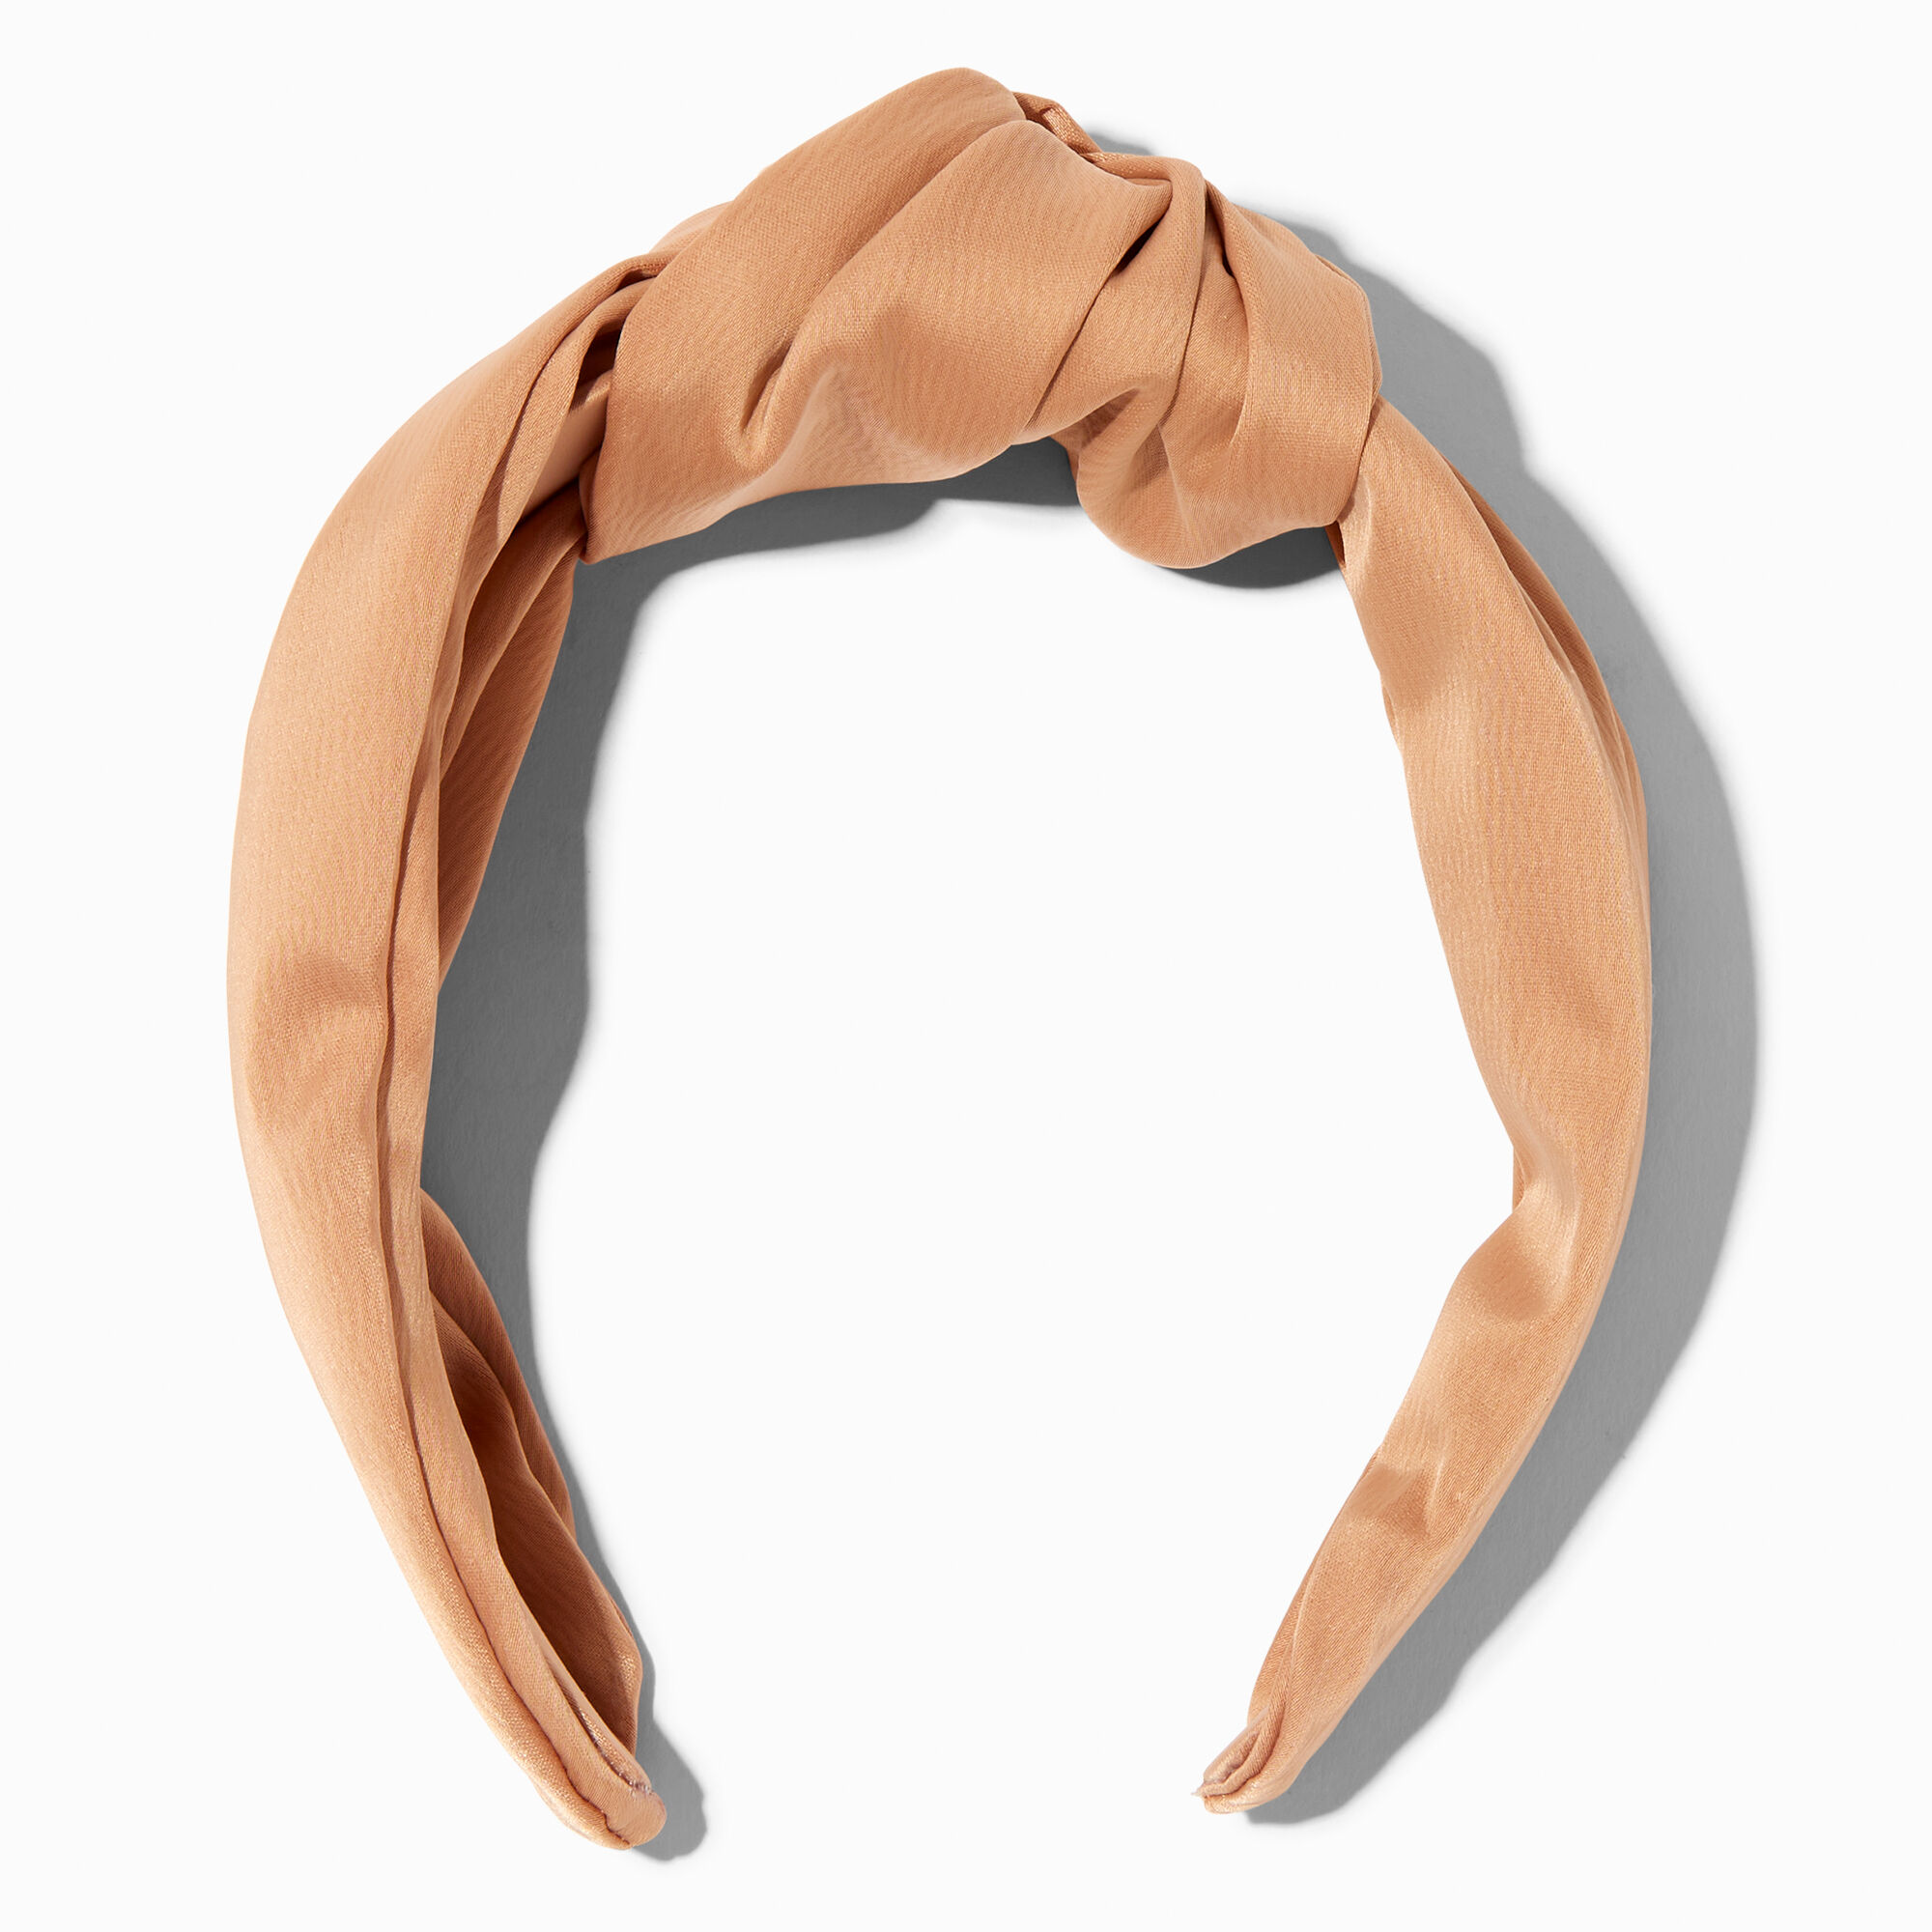 View Claires Satin Knotted Headband Tan information